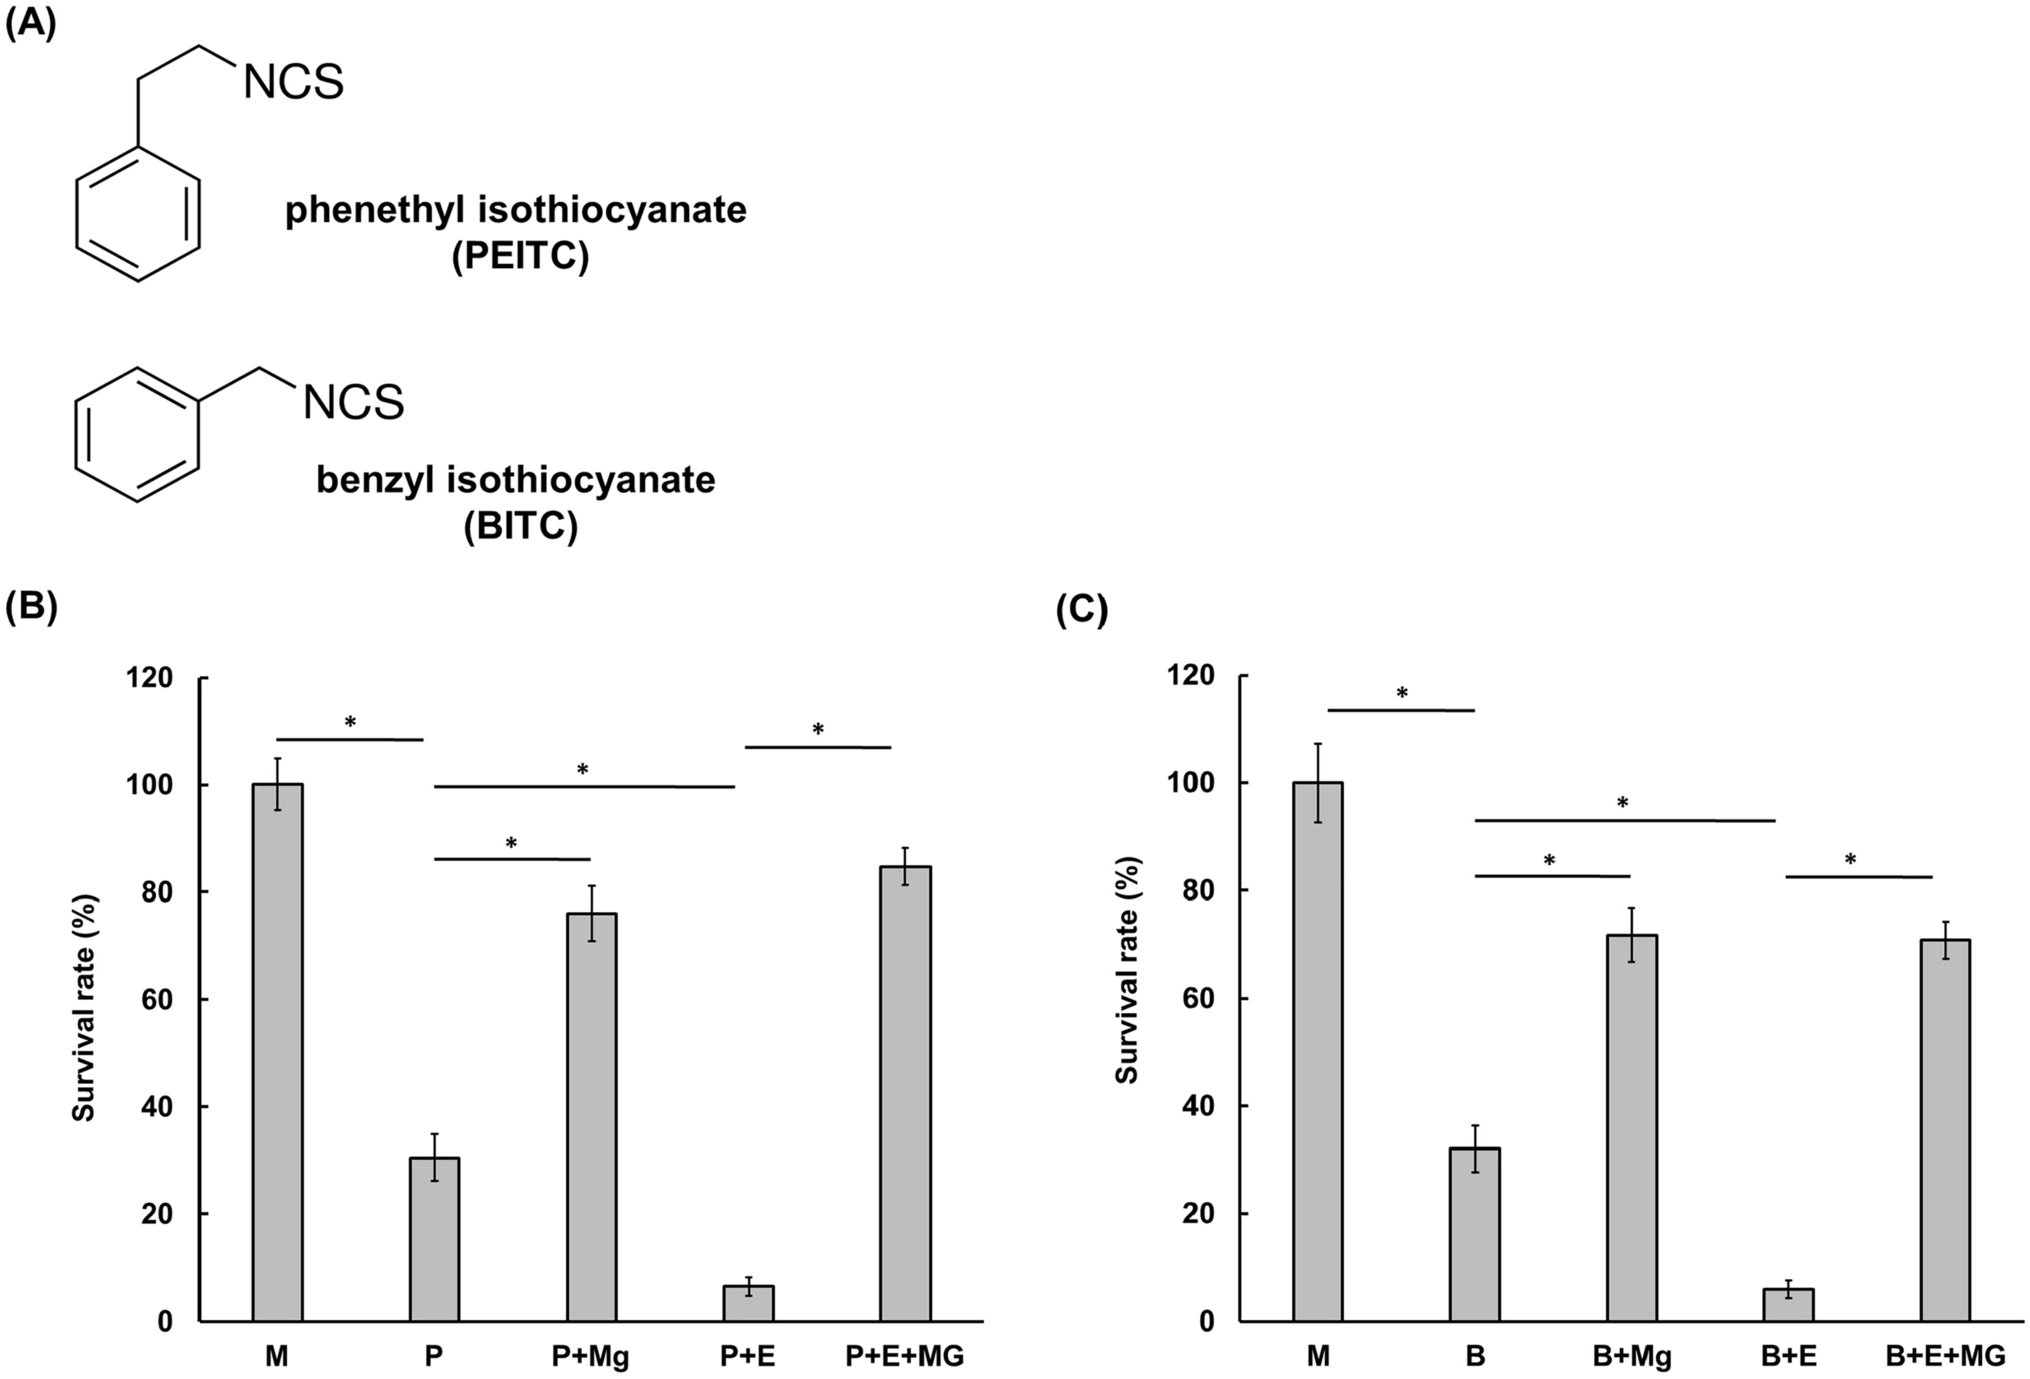 Efficacy of outer membrane permeabilization in promoting aromatic isothiocyanates-mediated eradication of multidrug resistant Gram-negative bacteria and bacterial persisters